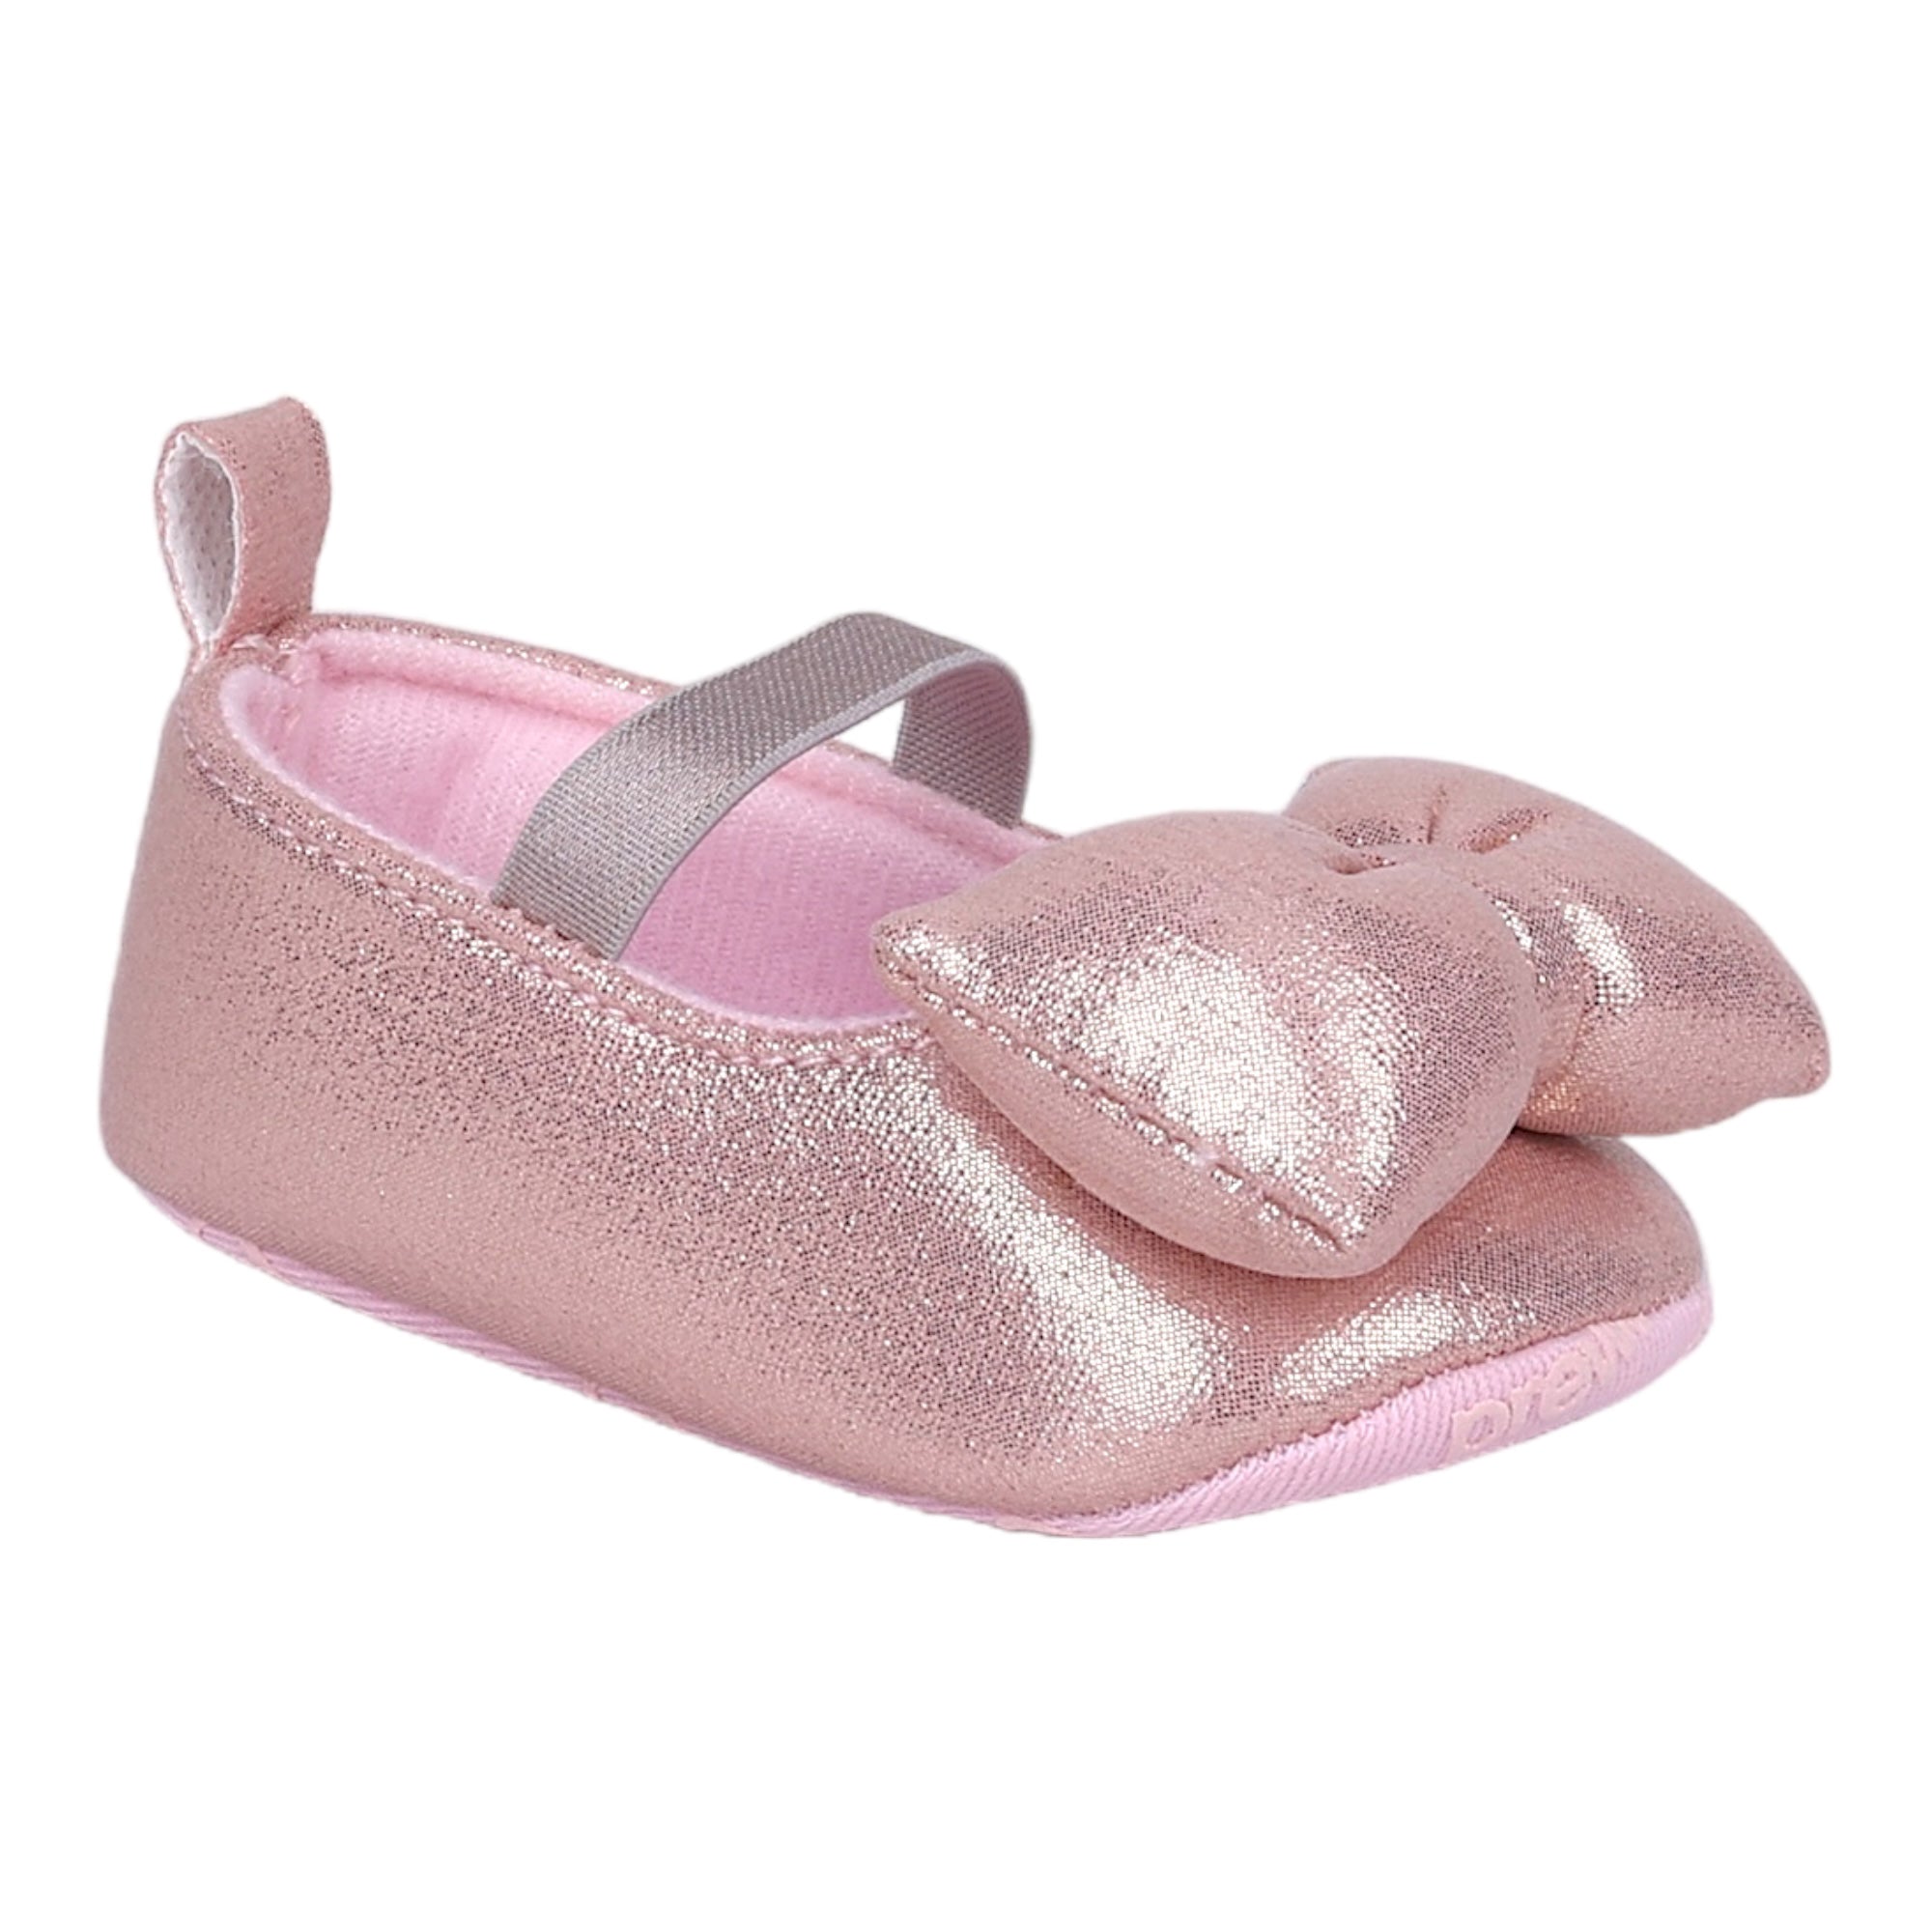 Baby Moo Partywear Shiny Bow Elastic Strap Anti-Skid Ballerina Booties - Pink